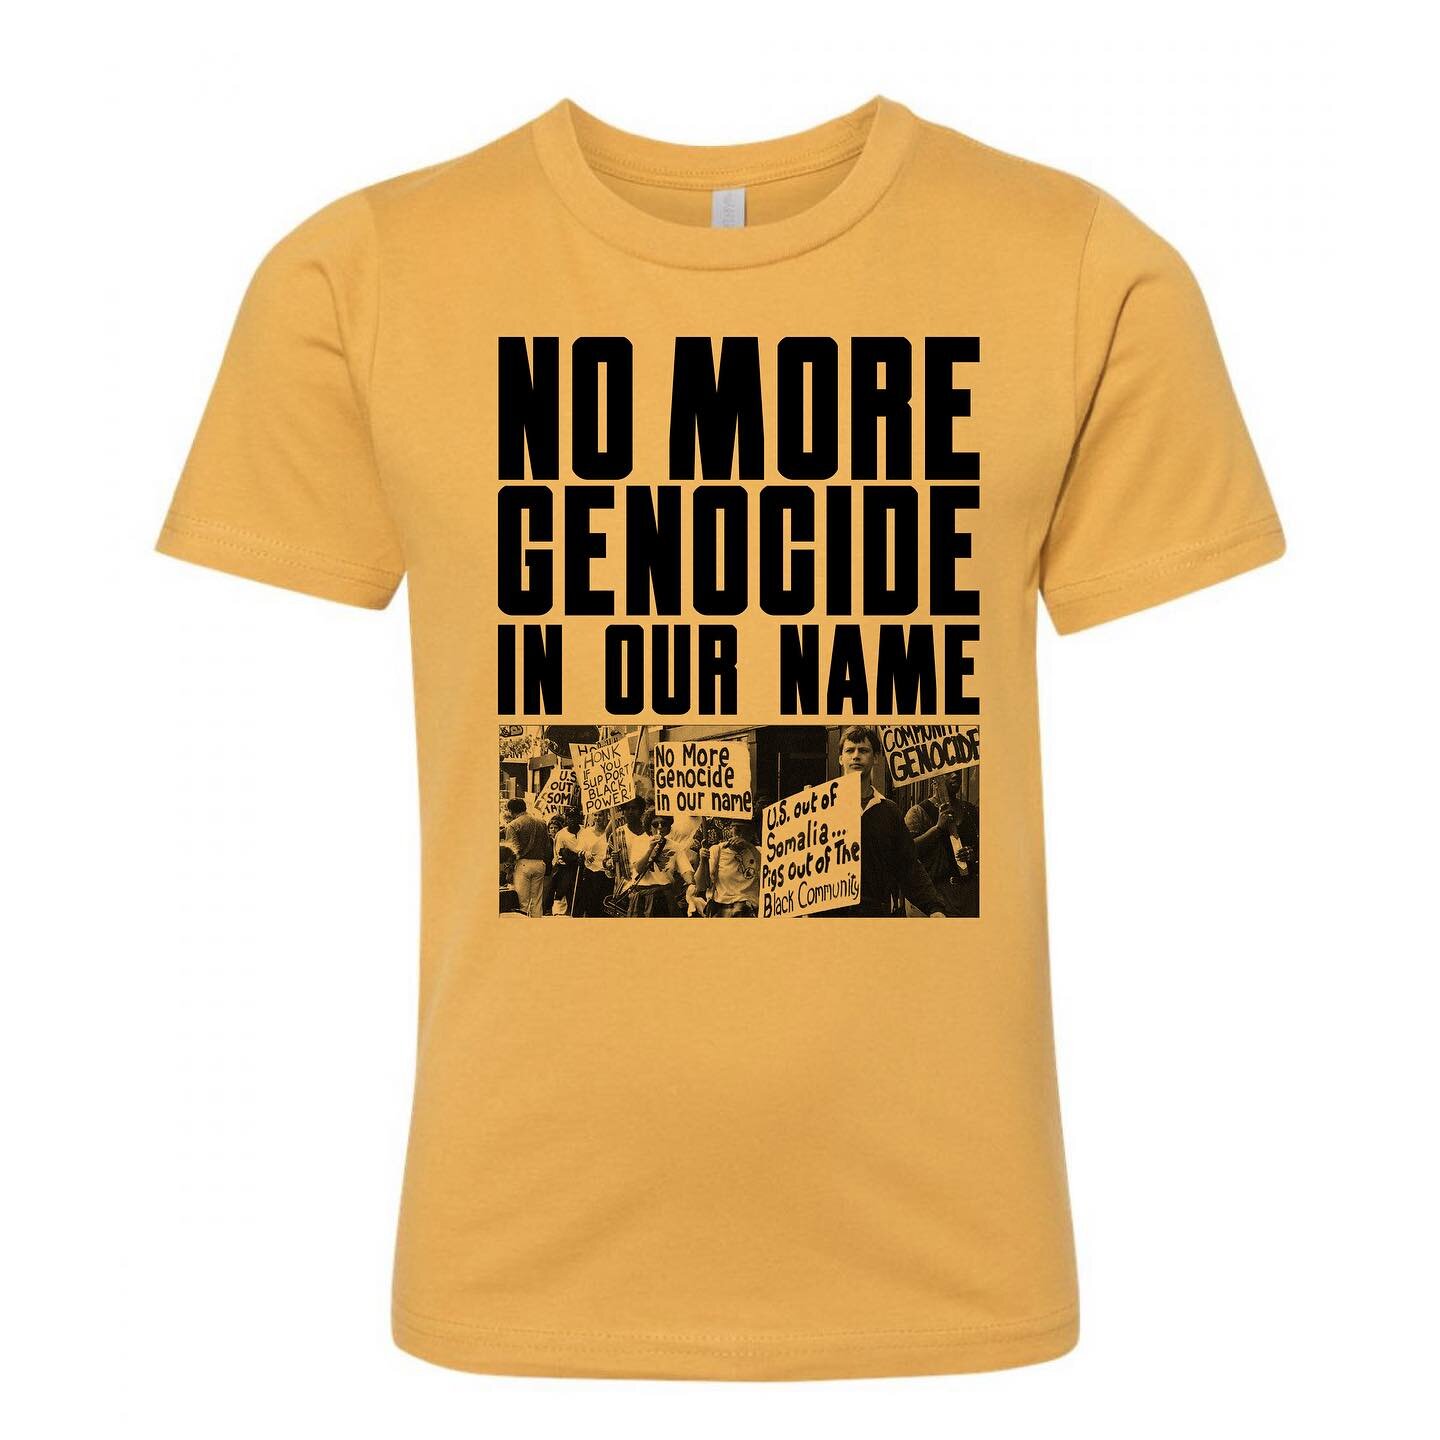 NO MORE GENOCIDE IN OUR NAME - Solidarity with African, Indigenous and Palestinian resistance! 
This is a sliding-scale fundraiser t-shirt for the @uhurusolidarity 2024 National Convention, &ldquo;No More Genocide In Our Name&rdquo; taking place Marc